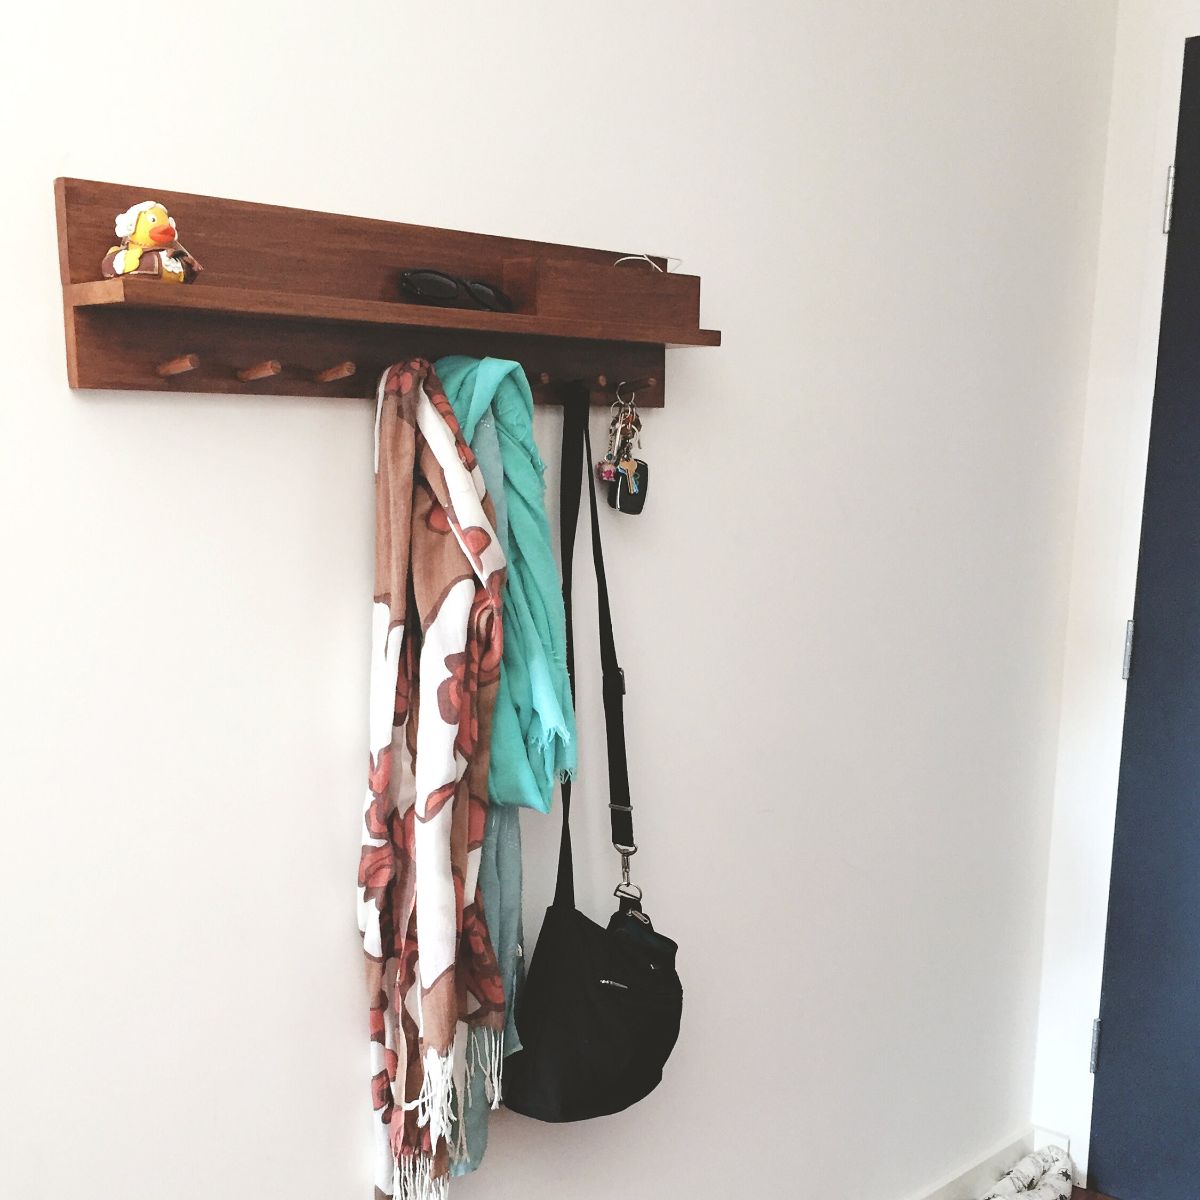 All-In-One Coat Rack Entryway Organiser Shelf. This item is 80cm with Tasmanian Oak Wood and Walnut stain Finish. 